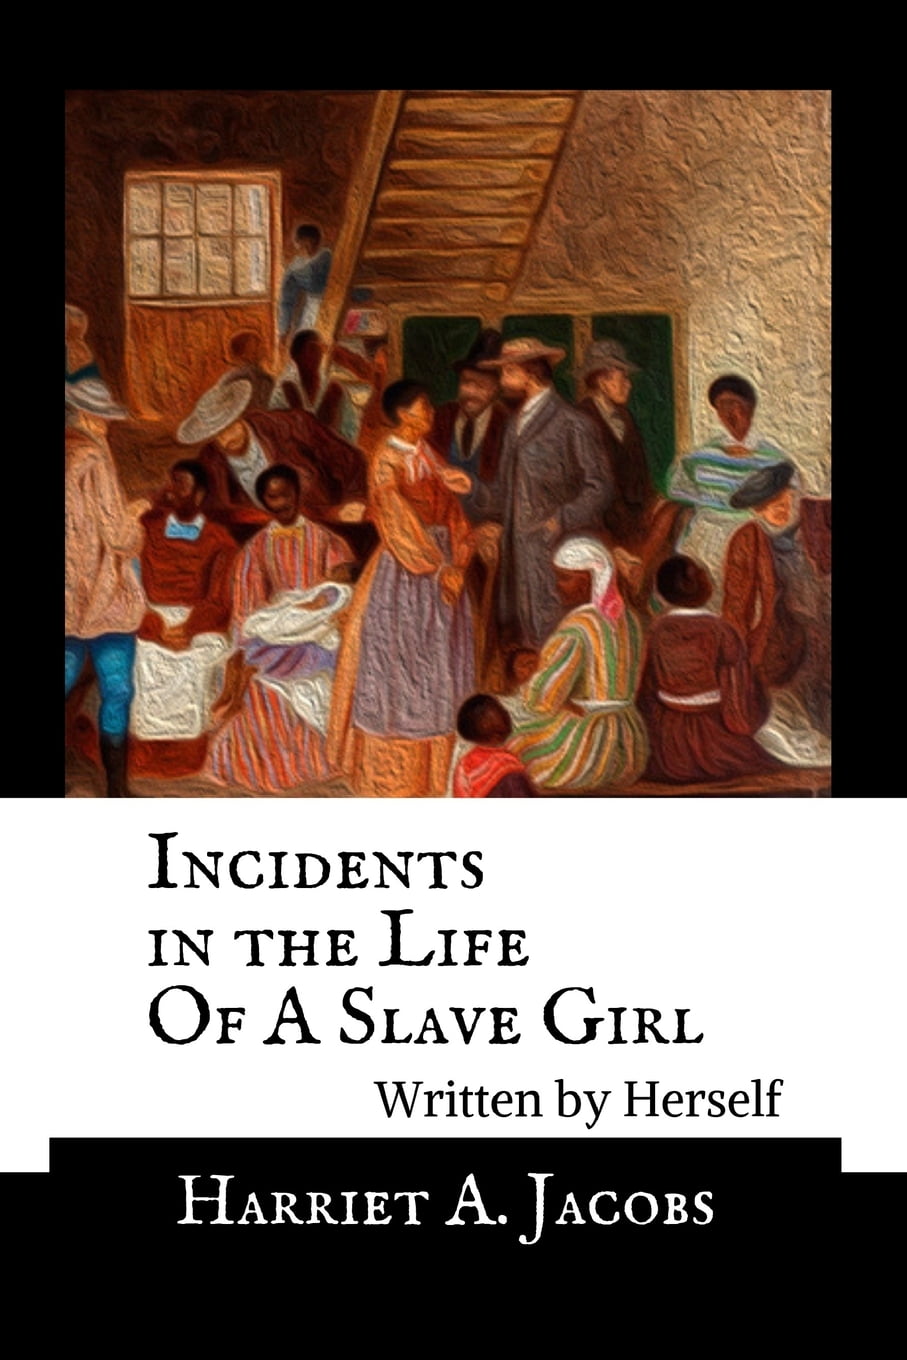 : This is a Narrative of a Slave Girl INCIDENTS IN THE LIFE OF A SLAVE GIRL Harriet Jacobs Her Life as a Slave Girl A Book About Slavery Annotated Written by Herself From Slavery to Freedom. 